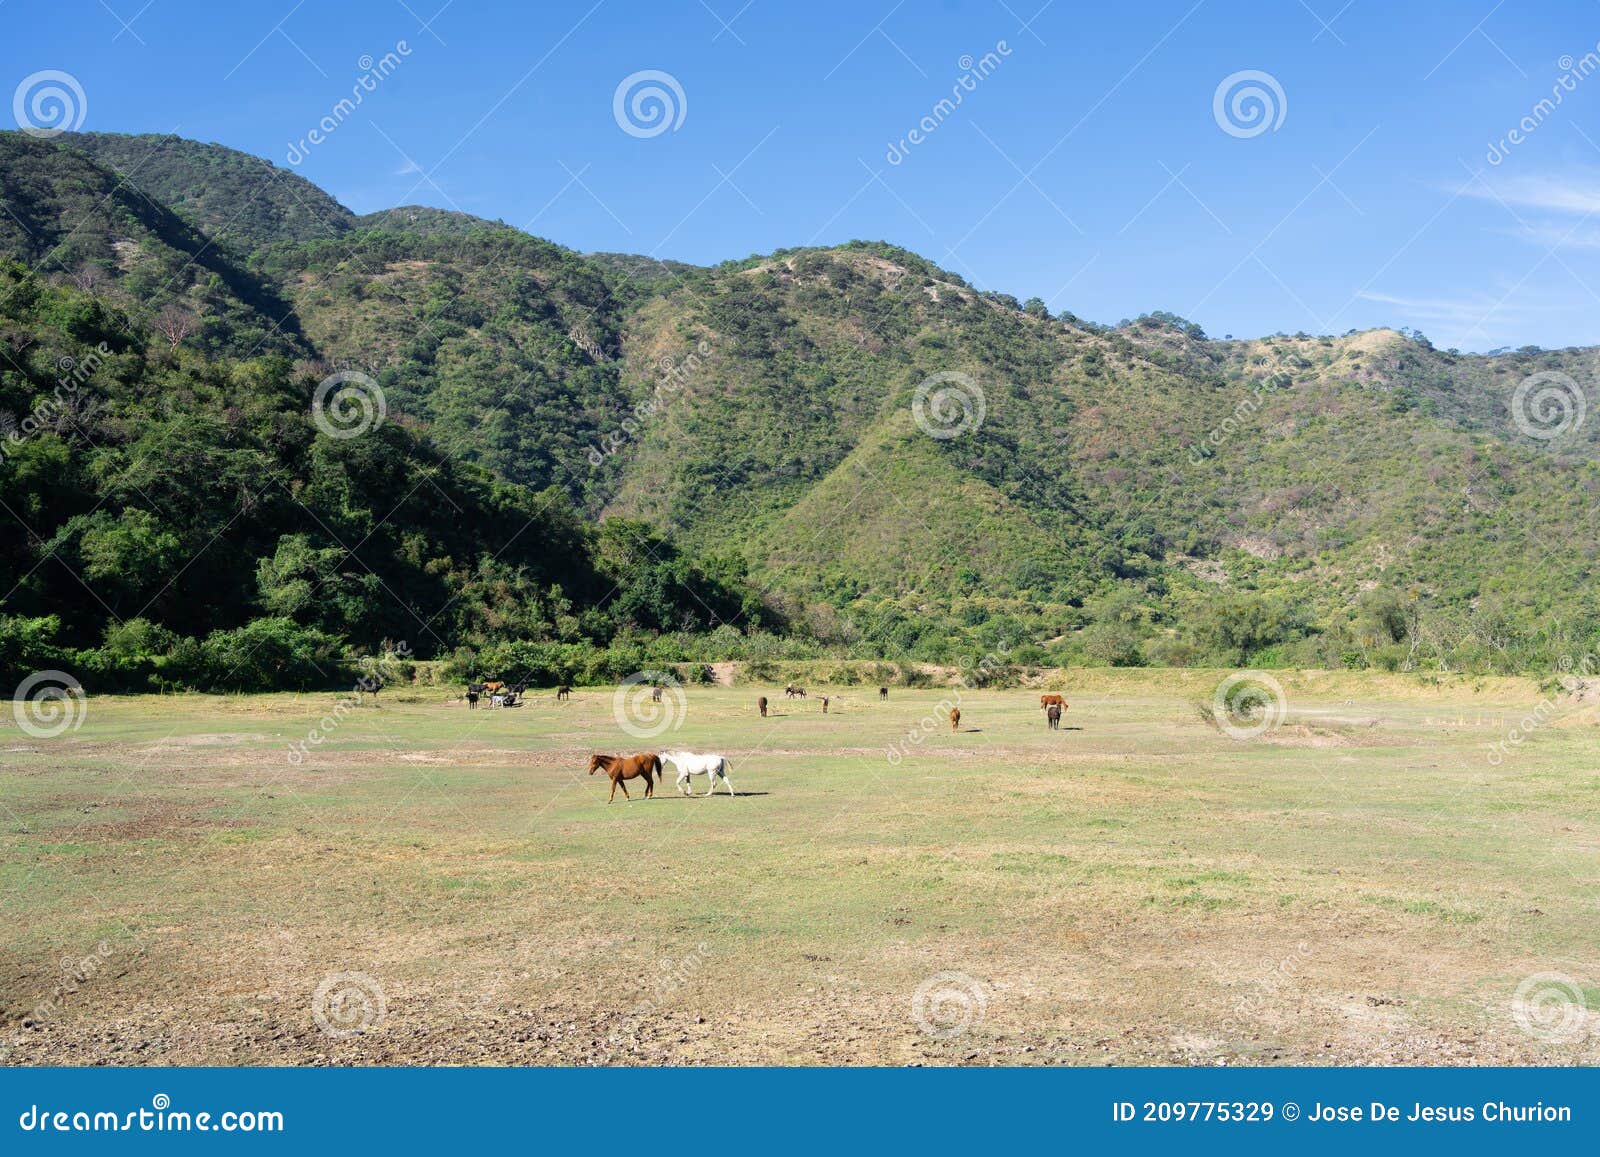 in the green field there are many horses.